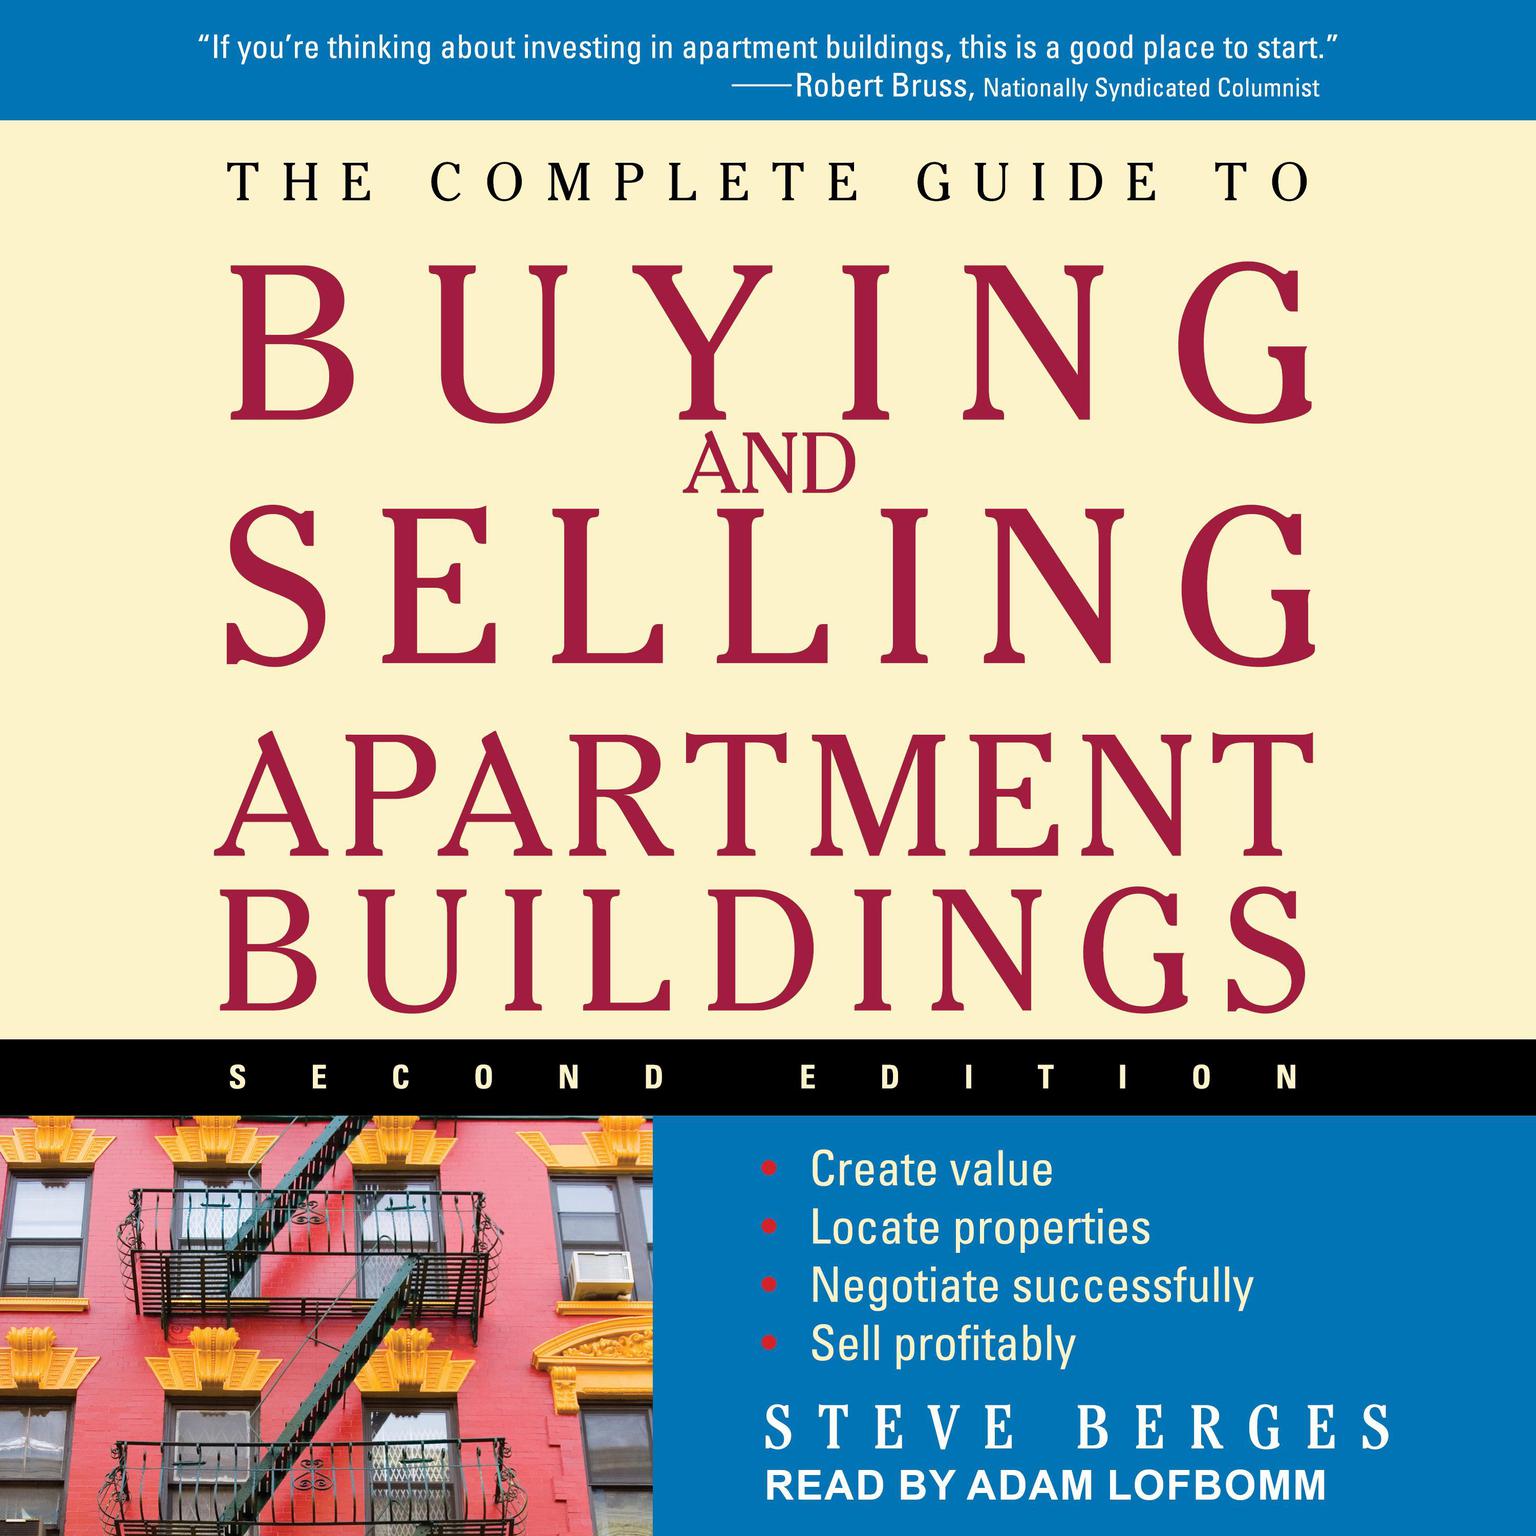 The Complete Guide to Buying and Selling Apartment Buildings: 2nd Edition Audiobook, by Steve Berges